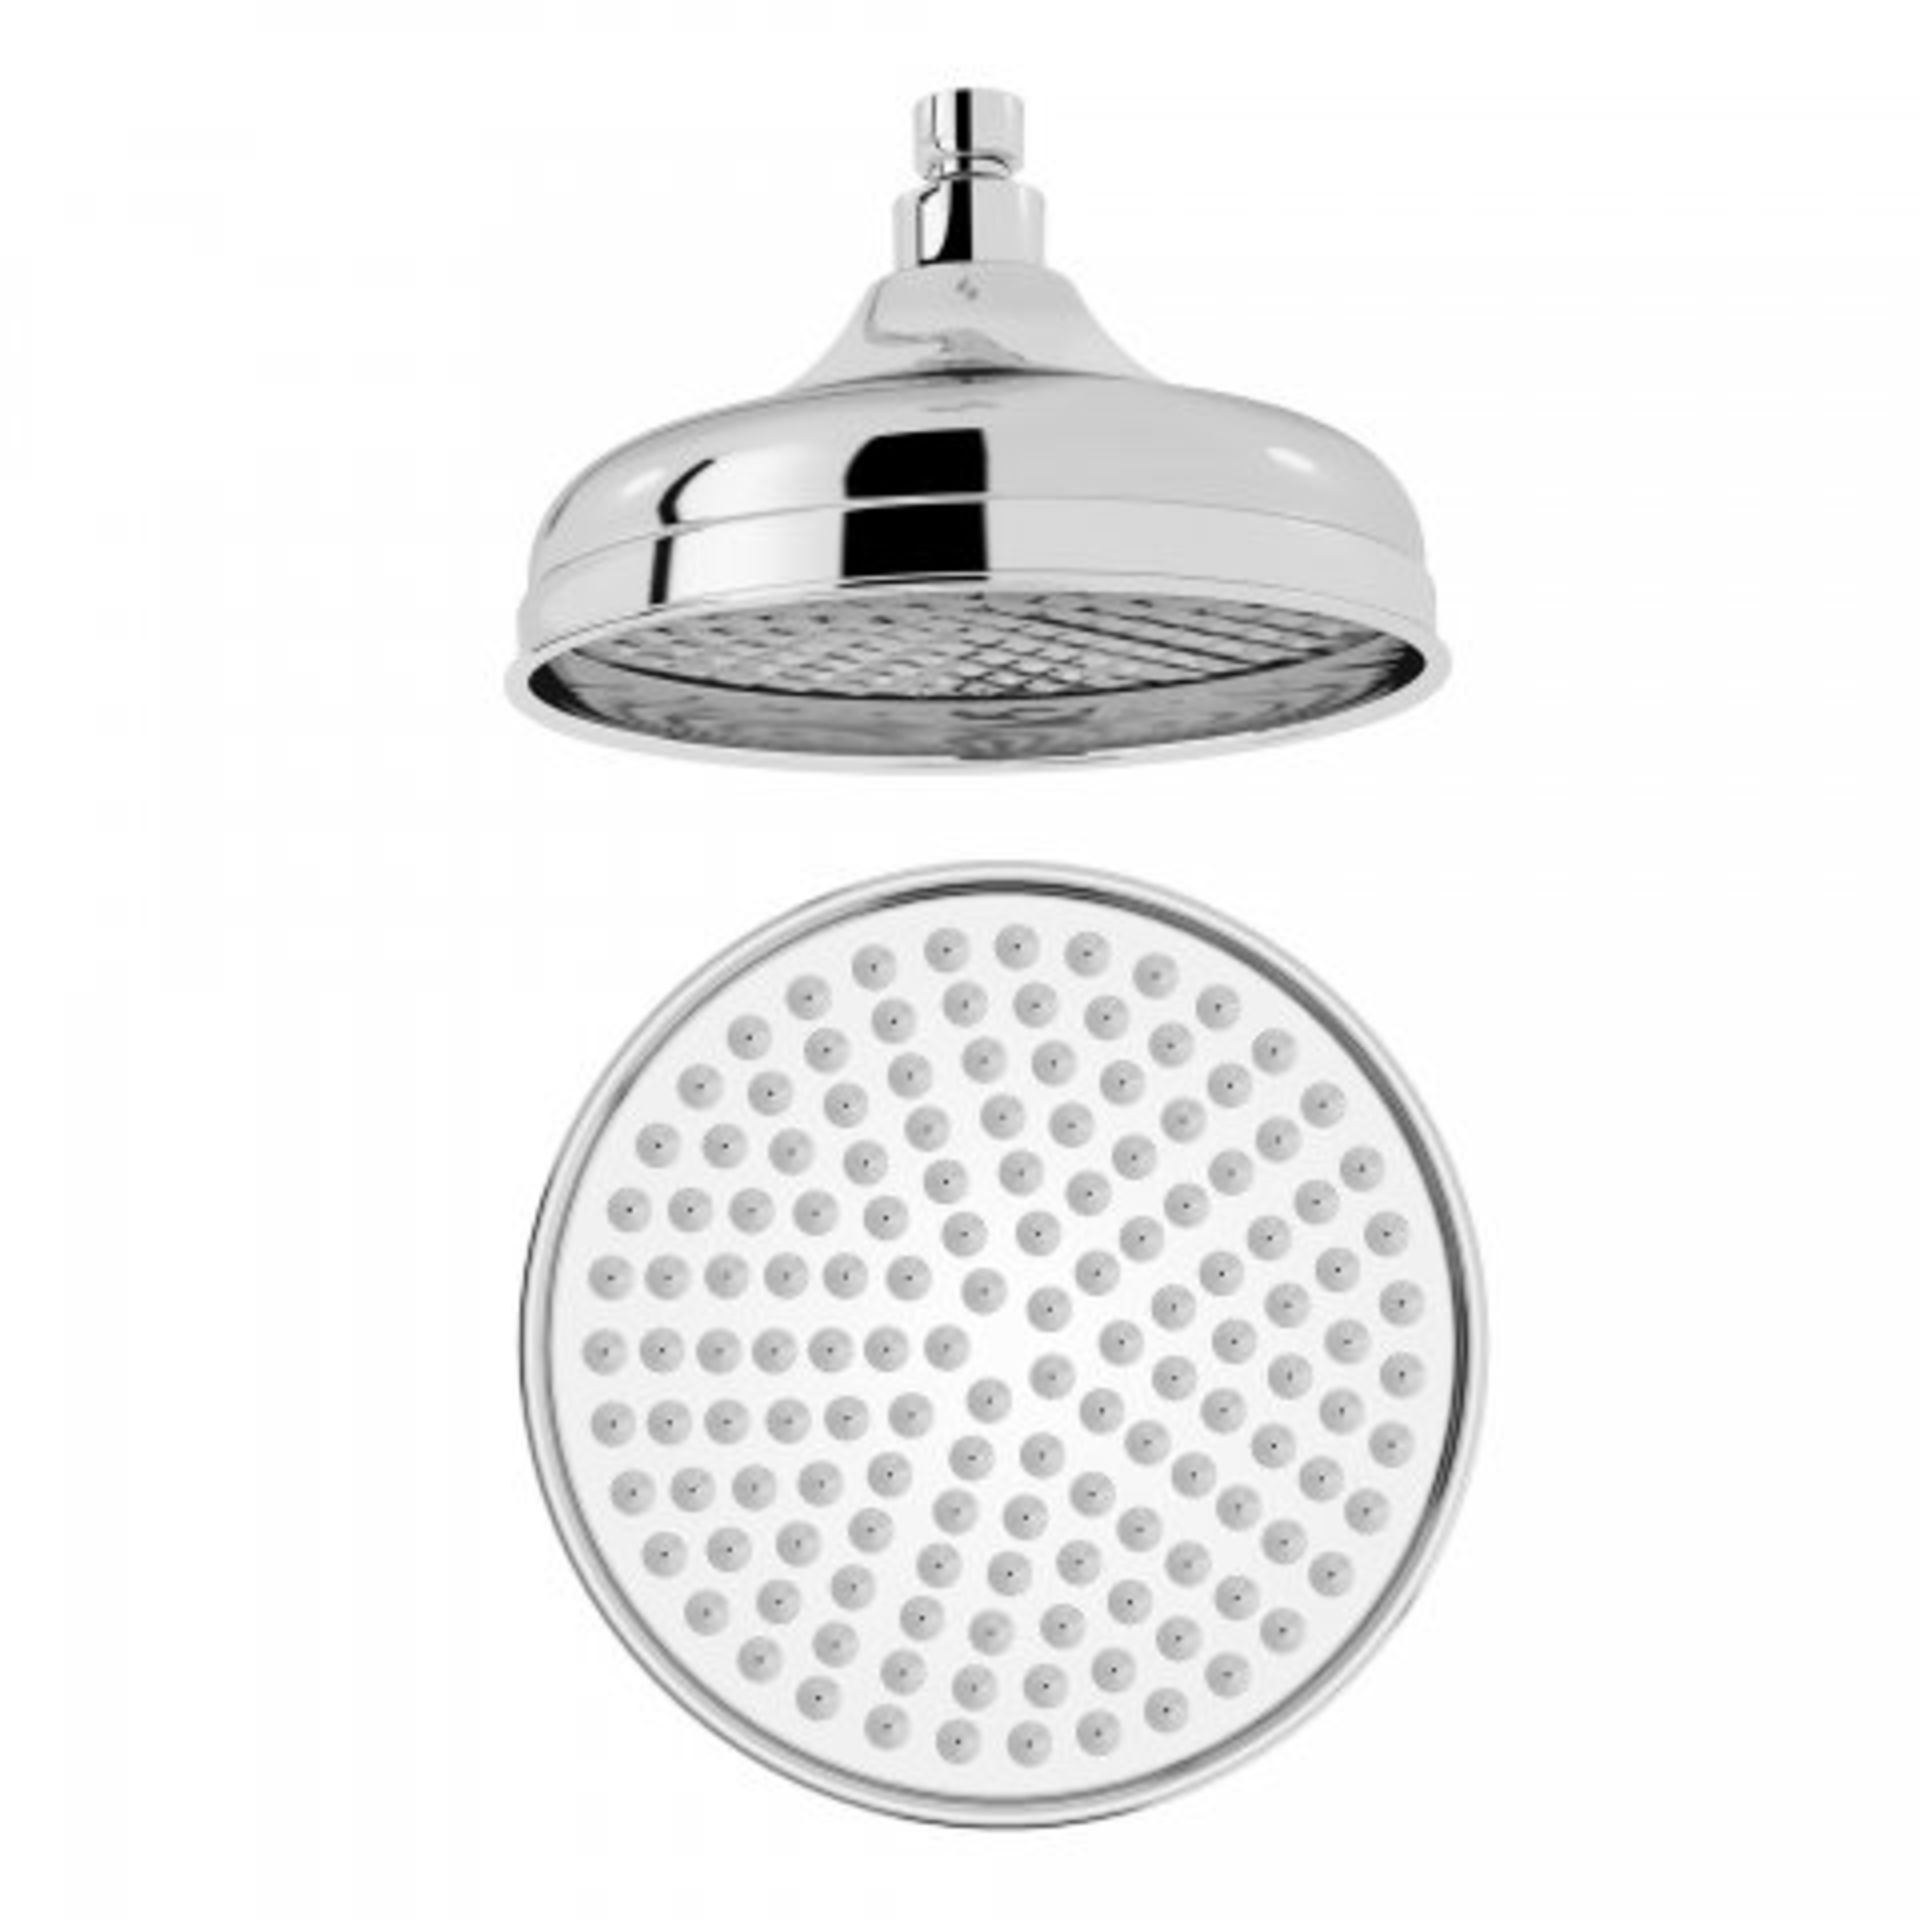 (REF146) 205mm Traditional Rain Chrome Plated Solid Brass Shower Head - Finest Range Our stunning